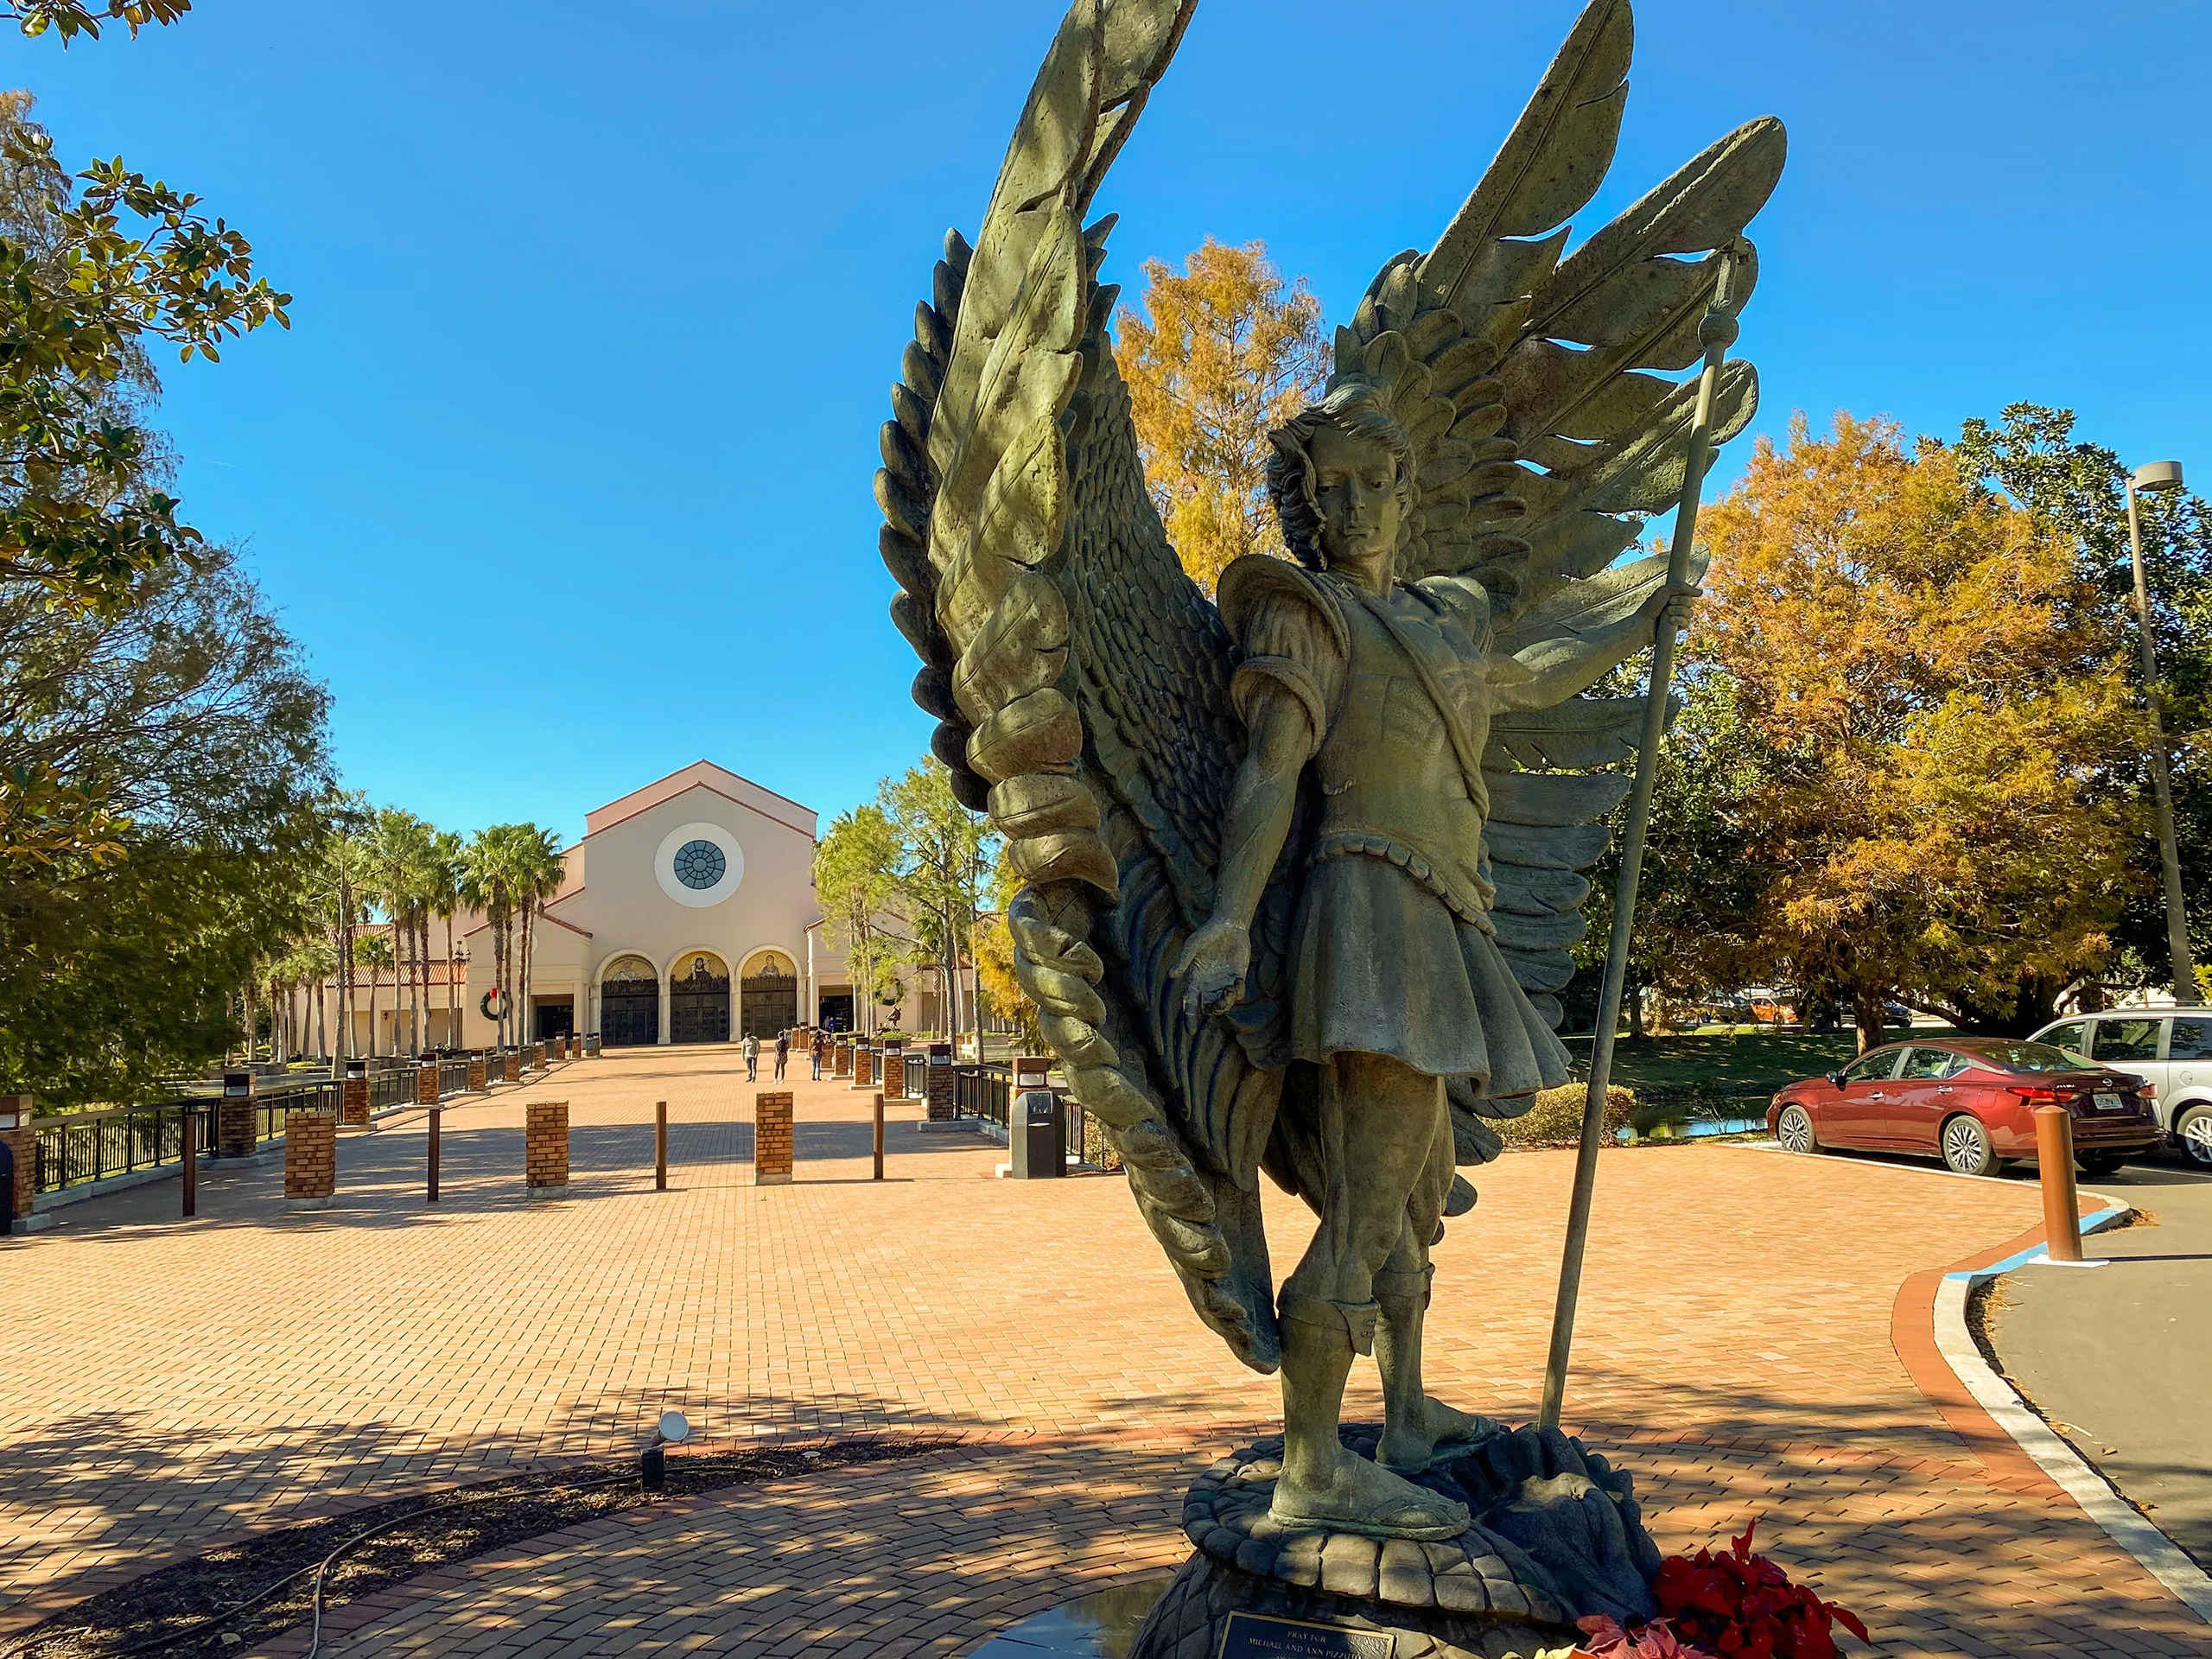 A statue of St. Michael the Archangel is one of several opportunities for outdoor veneration at the Basilica of the National Shrine of Mary, Queen of the Universe in Orlando near the major theme parks.?w=200&h=150